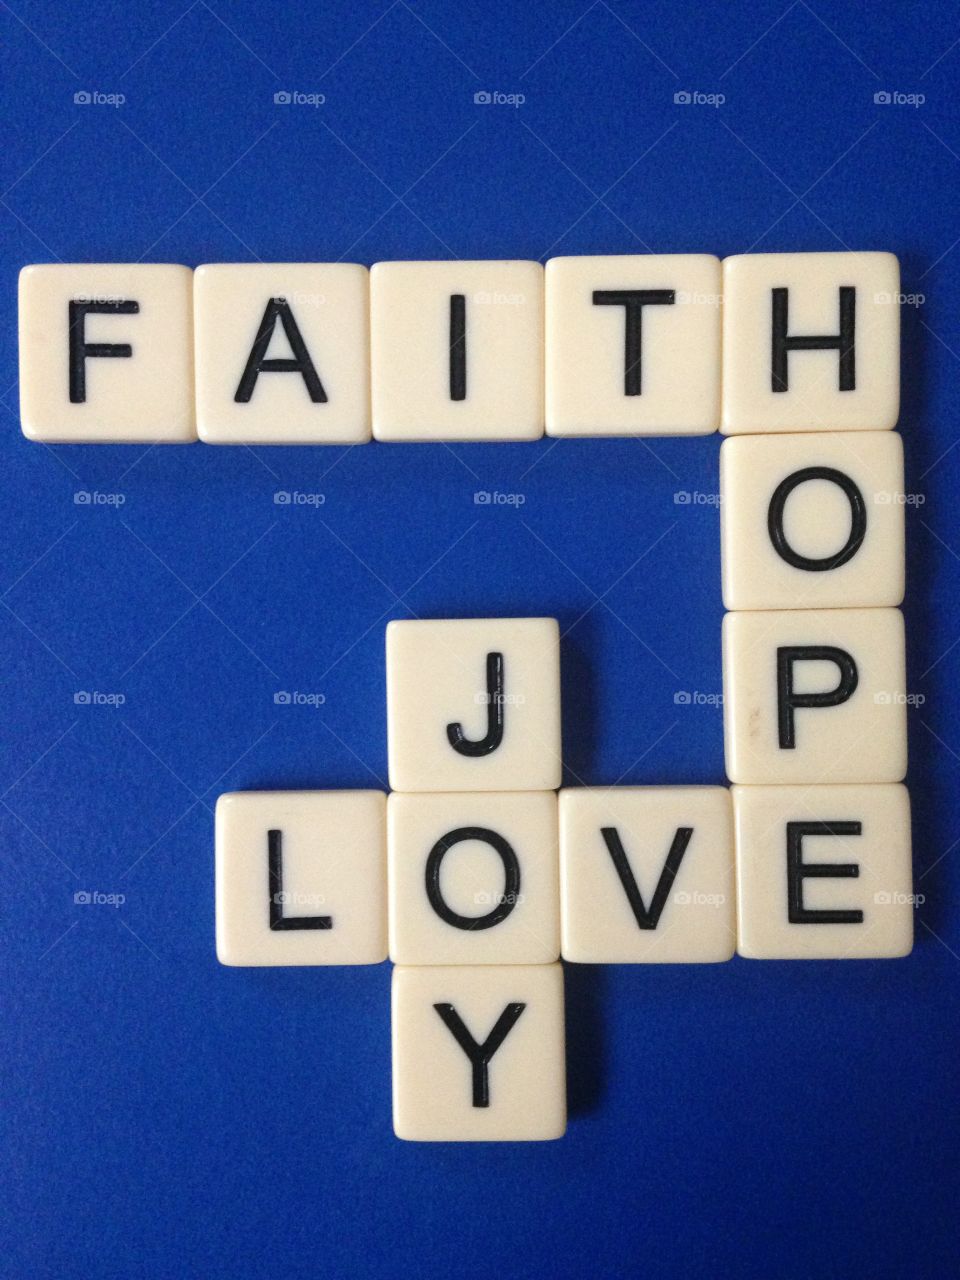 Faith, hope, love, and joy. Words made with letter tiles